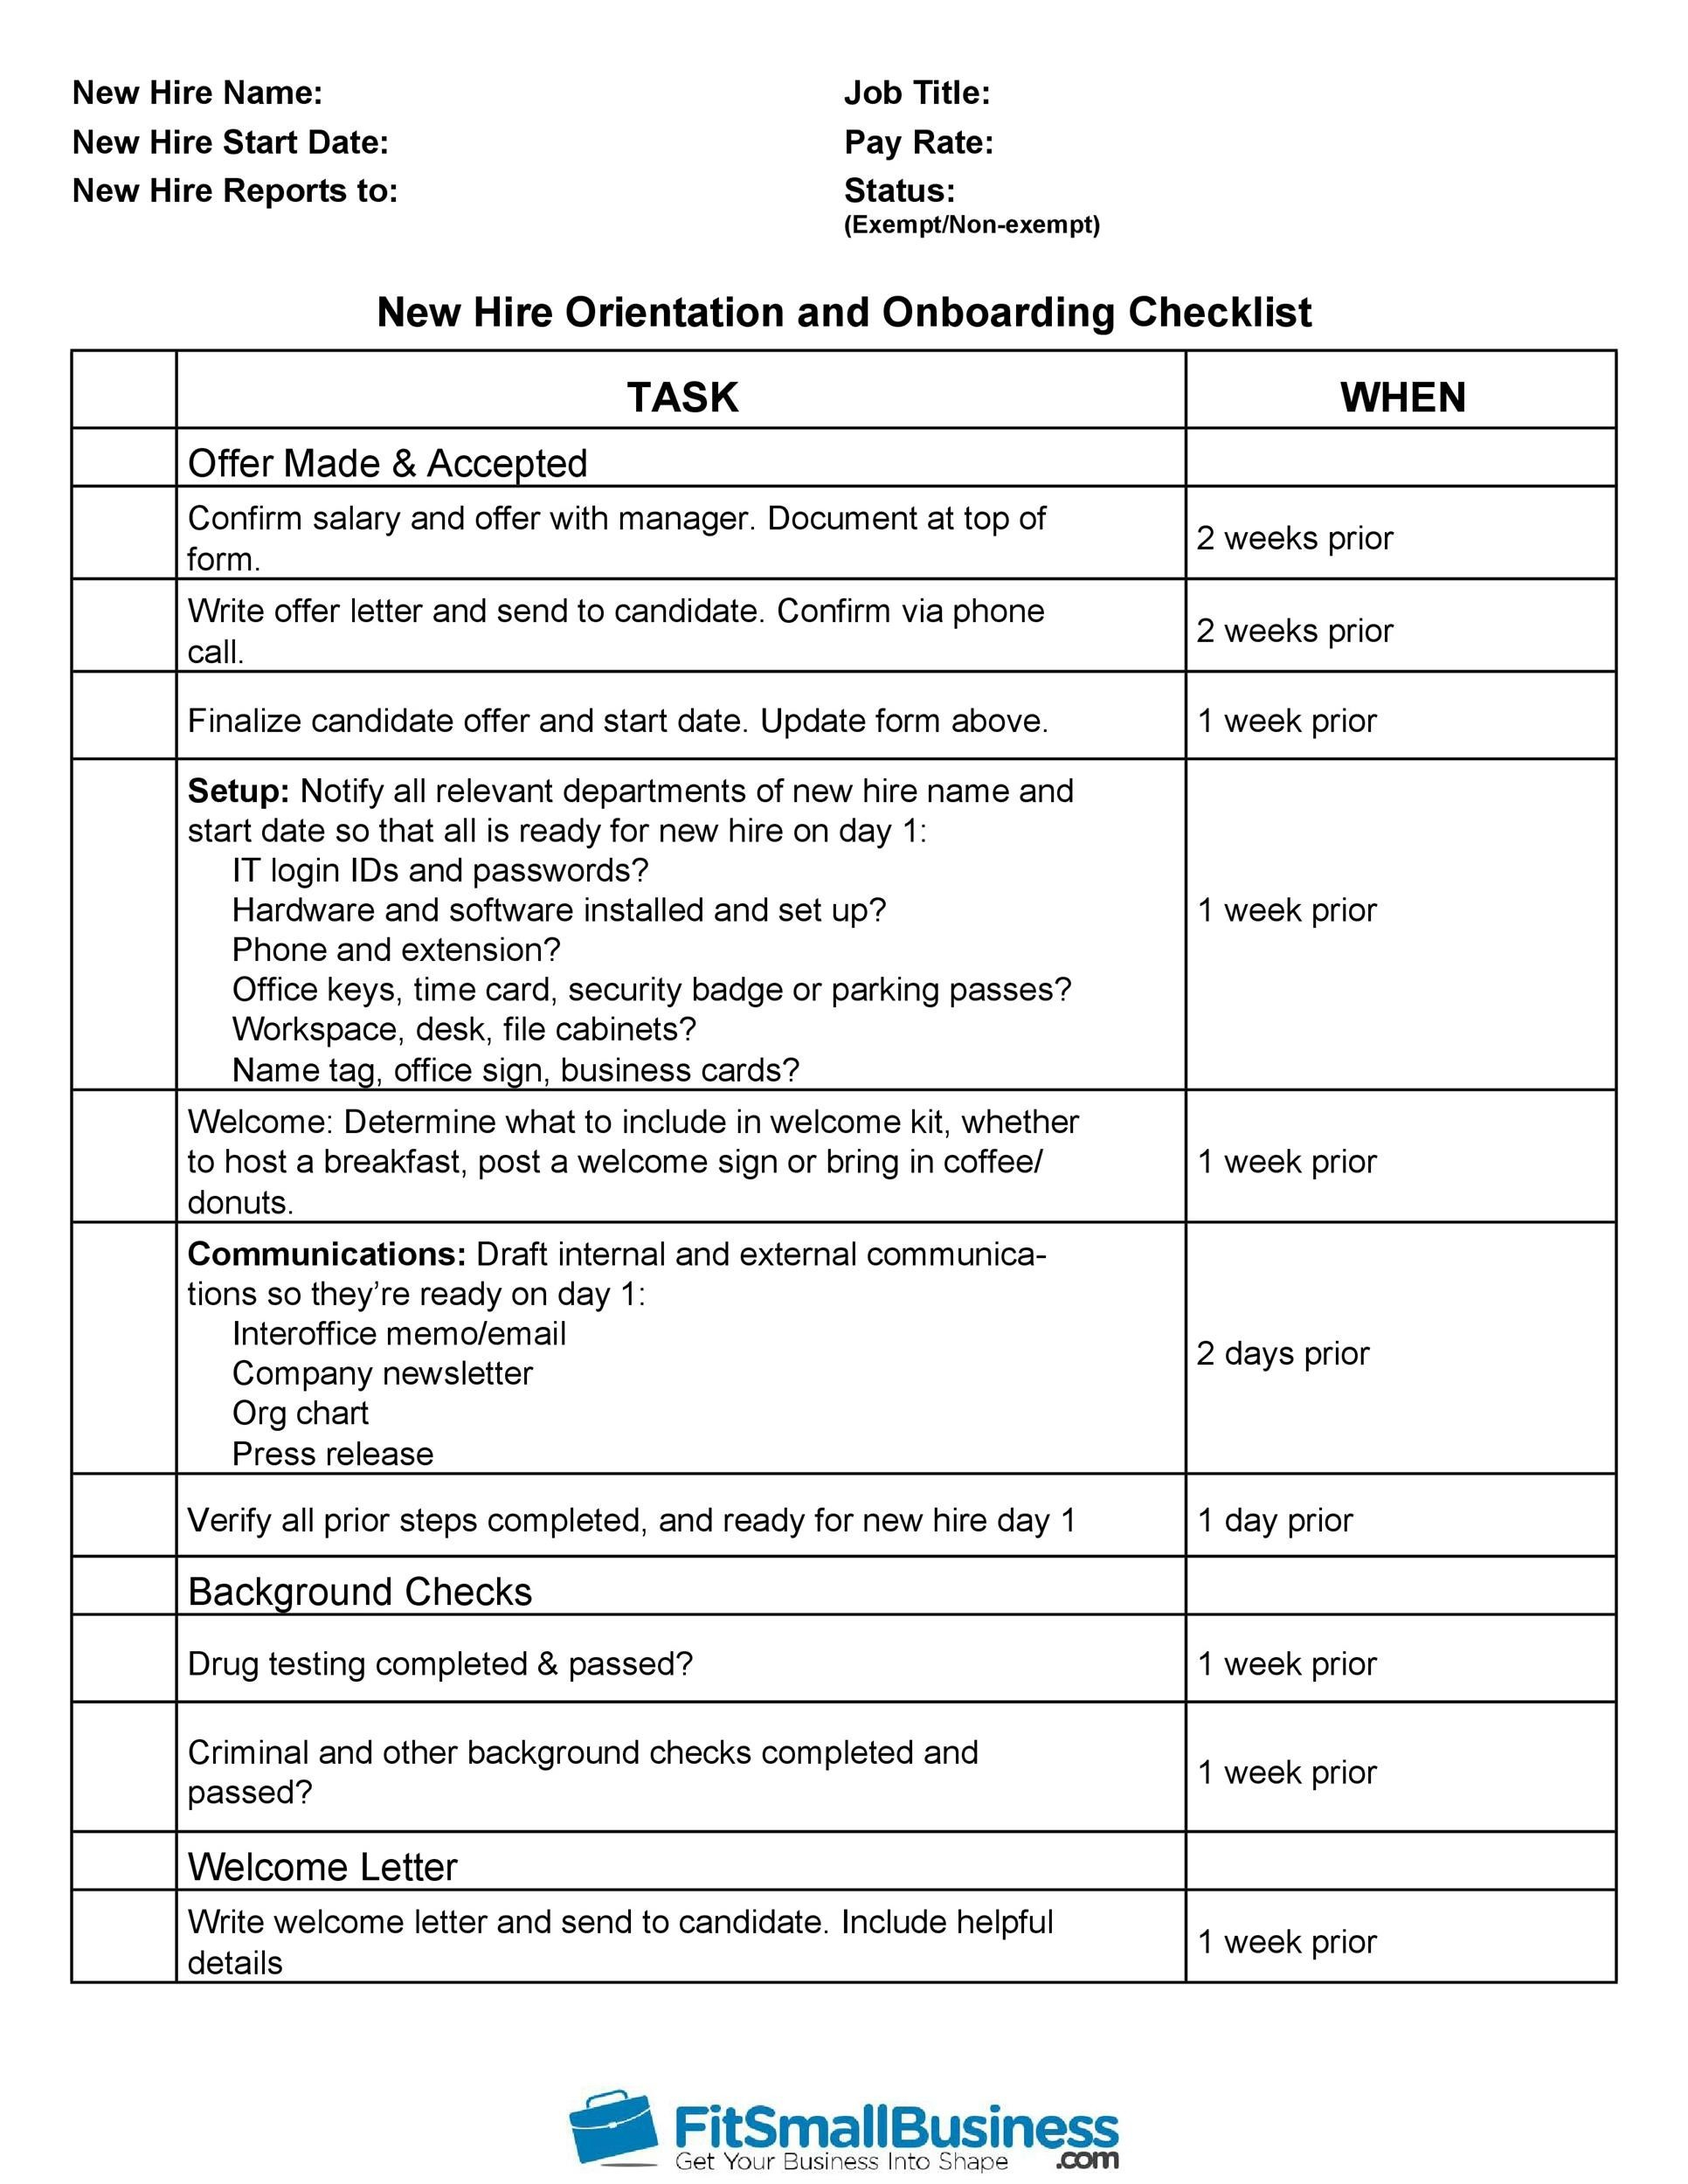 11 Useful New Hire Checklist Templates & Forms ᐅ TemplateLab With New Employee Training Checklist Template With New Employee Training Checklist Template